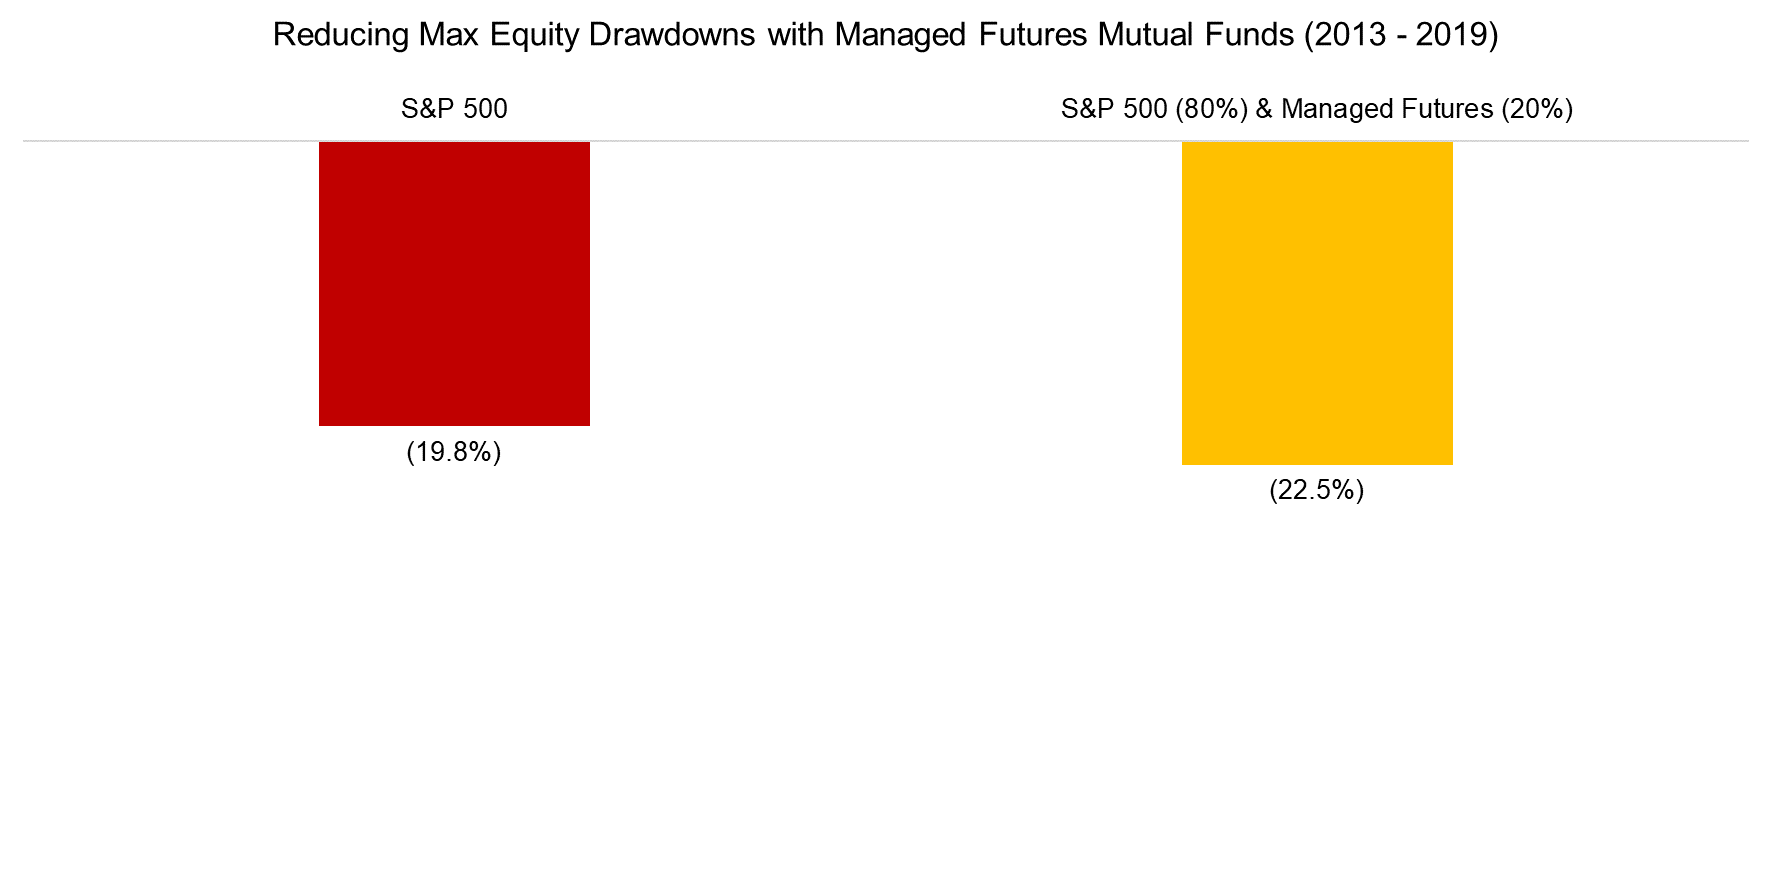 Reducing Max Equity Drawdowns with Managed Futures Mutual Funds (2013 - 2019)